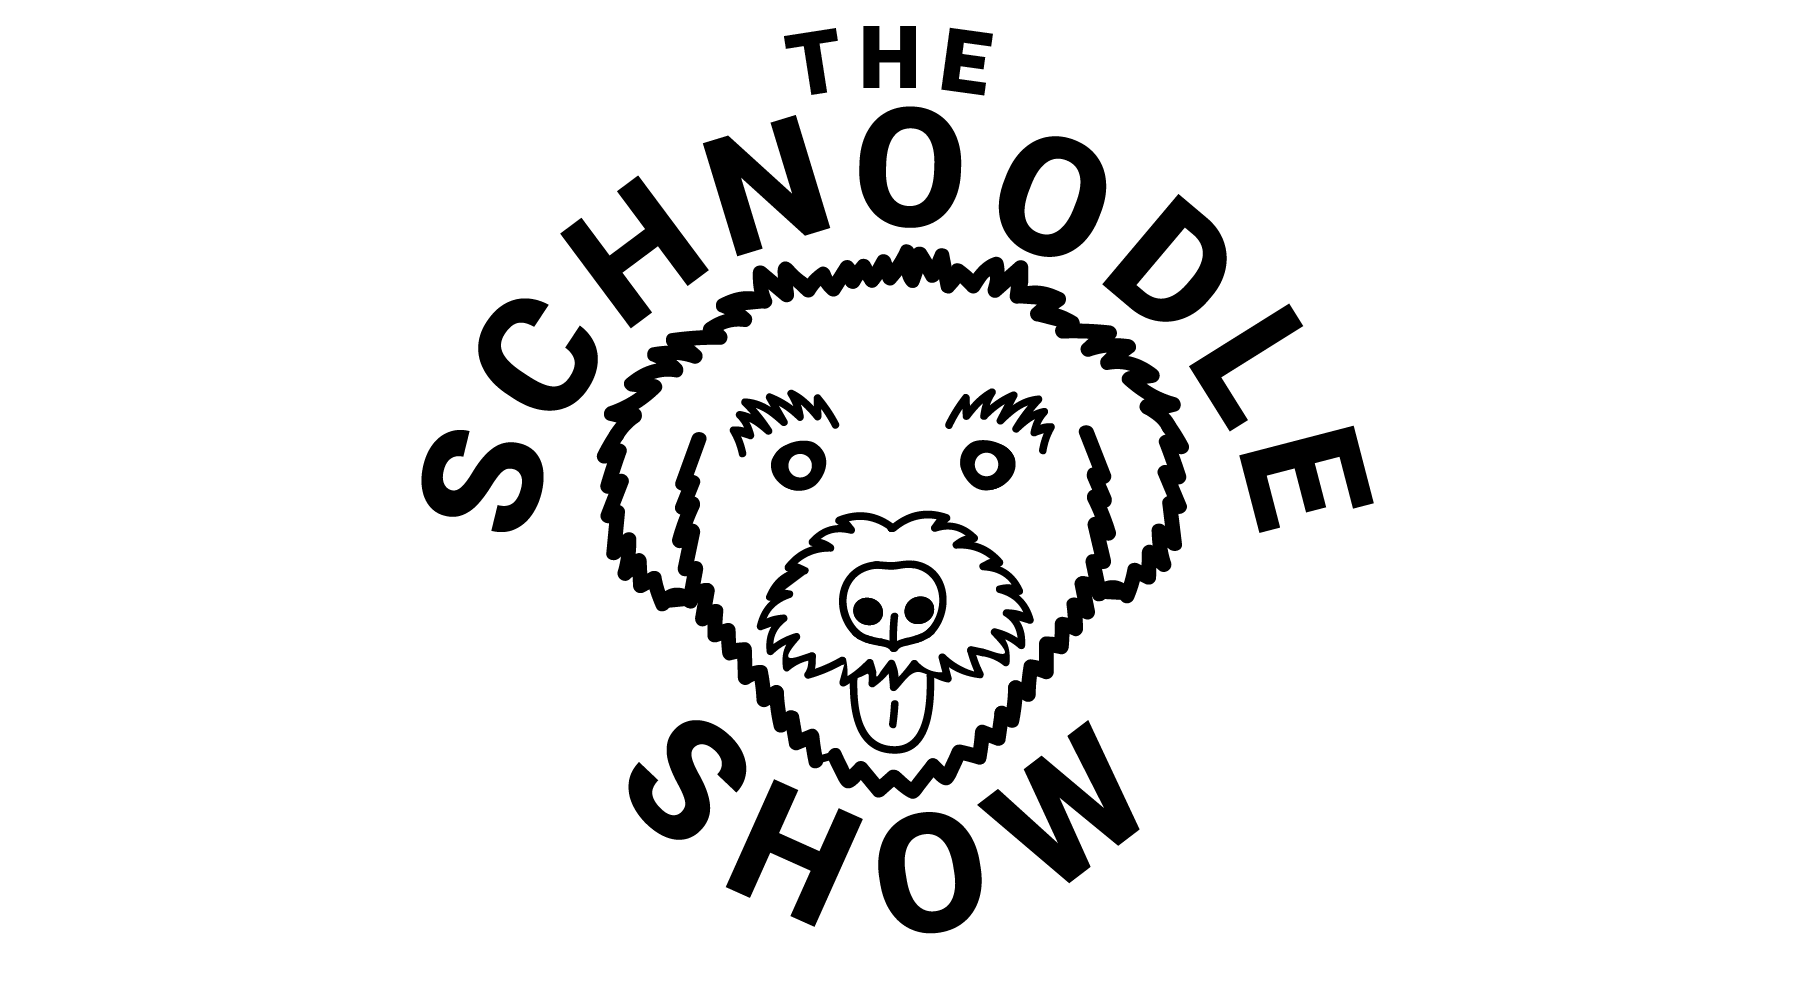 The Schnoodle Show